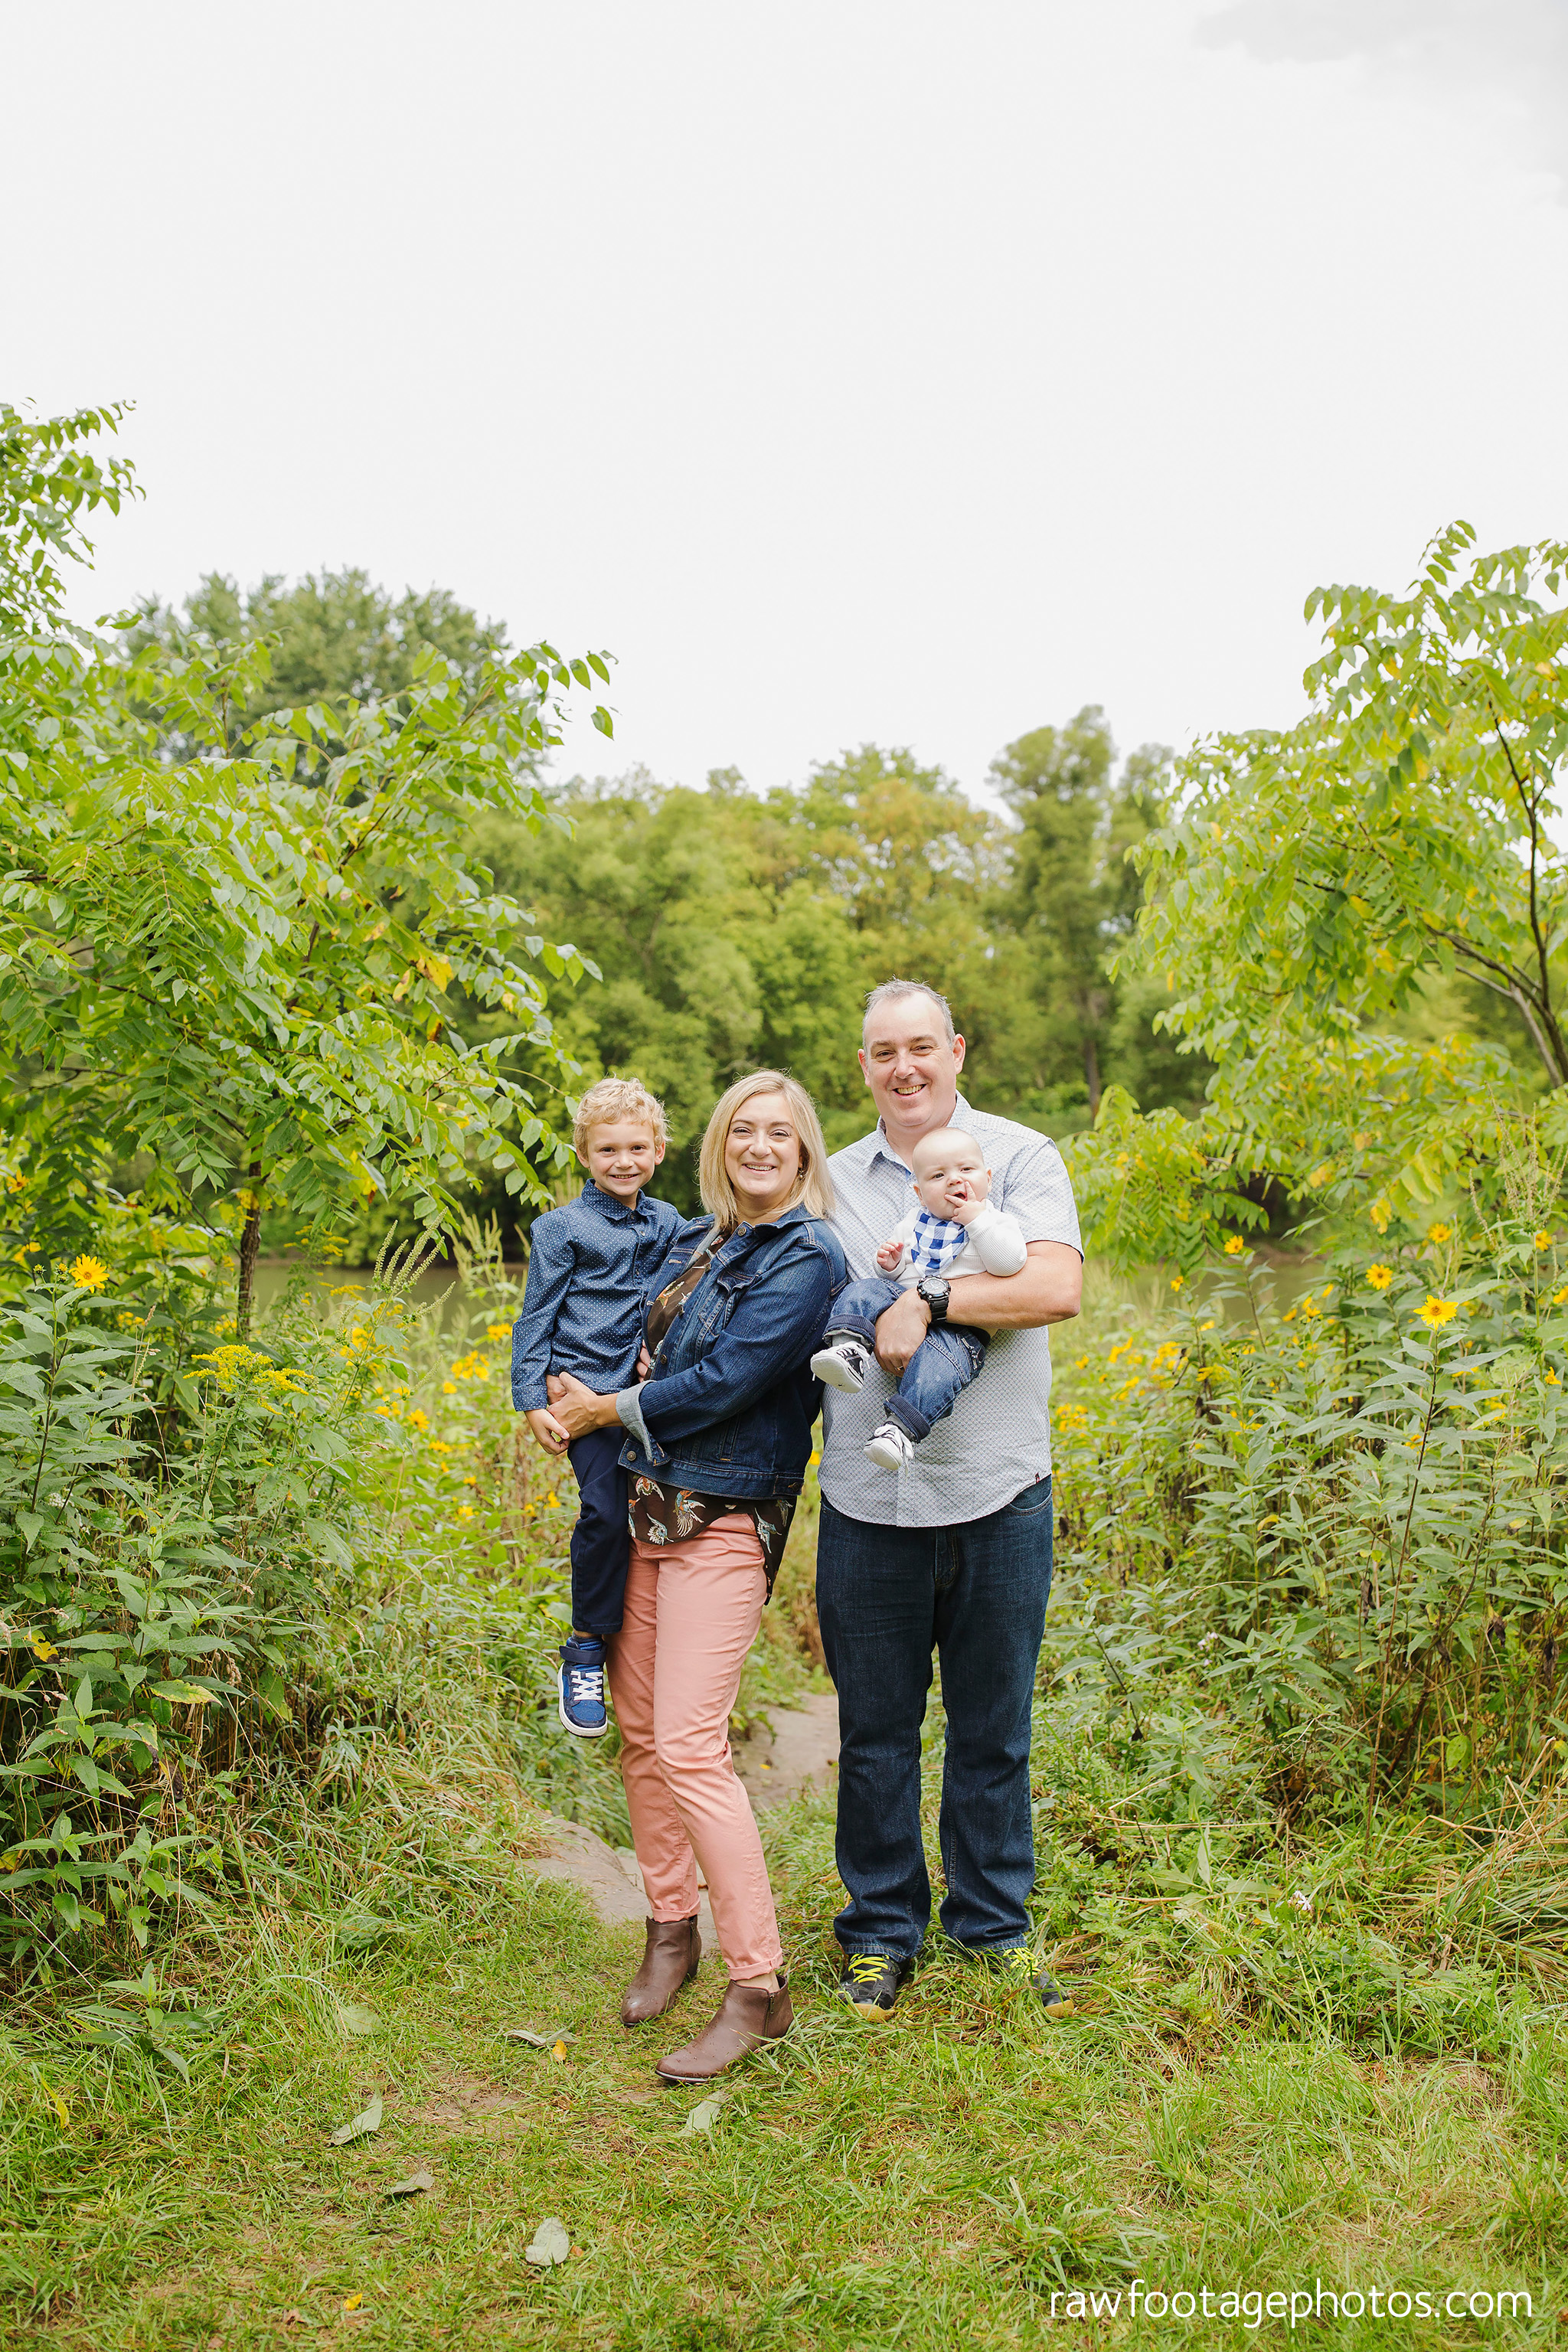 london_ontario_extended_family_photographer-raw_footage_photography002.jpg